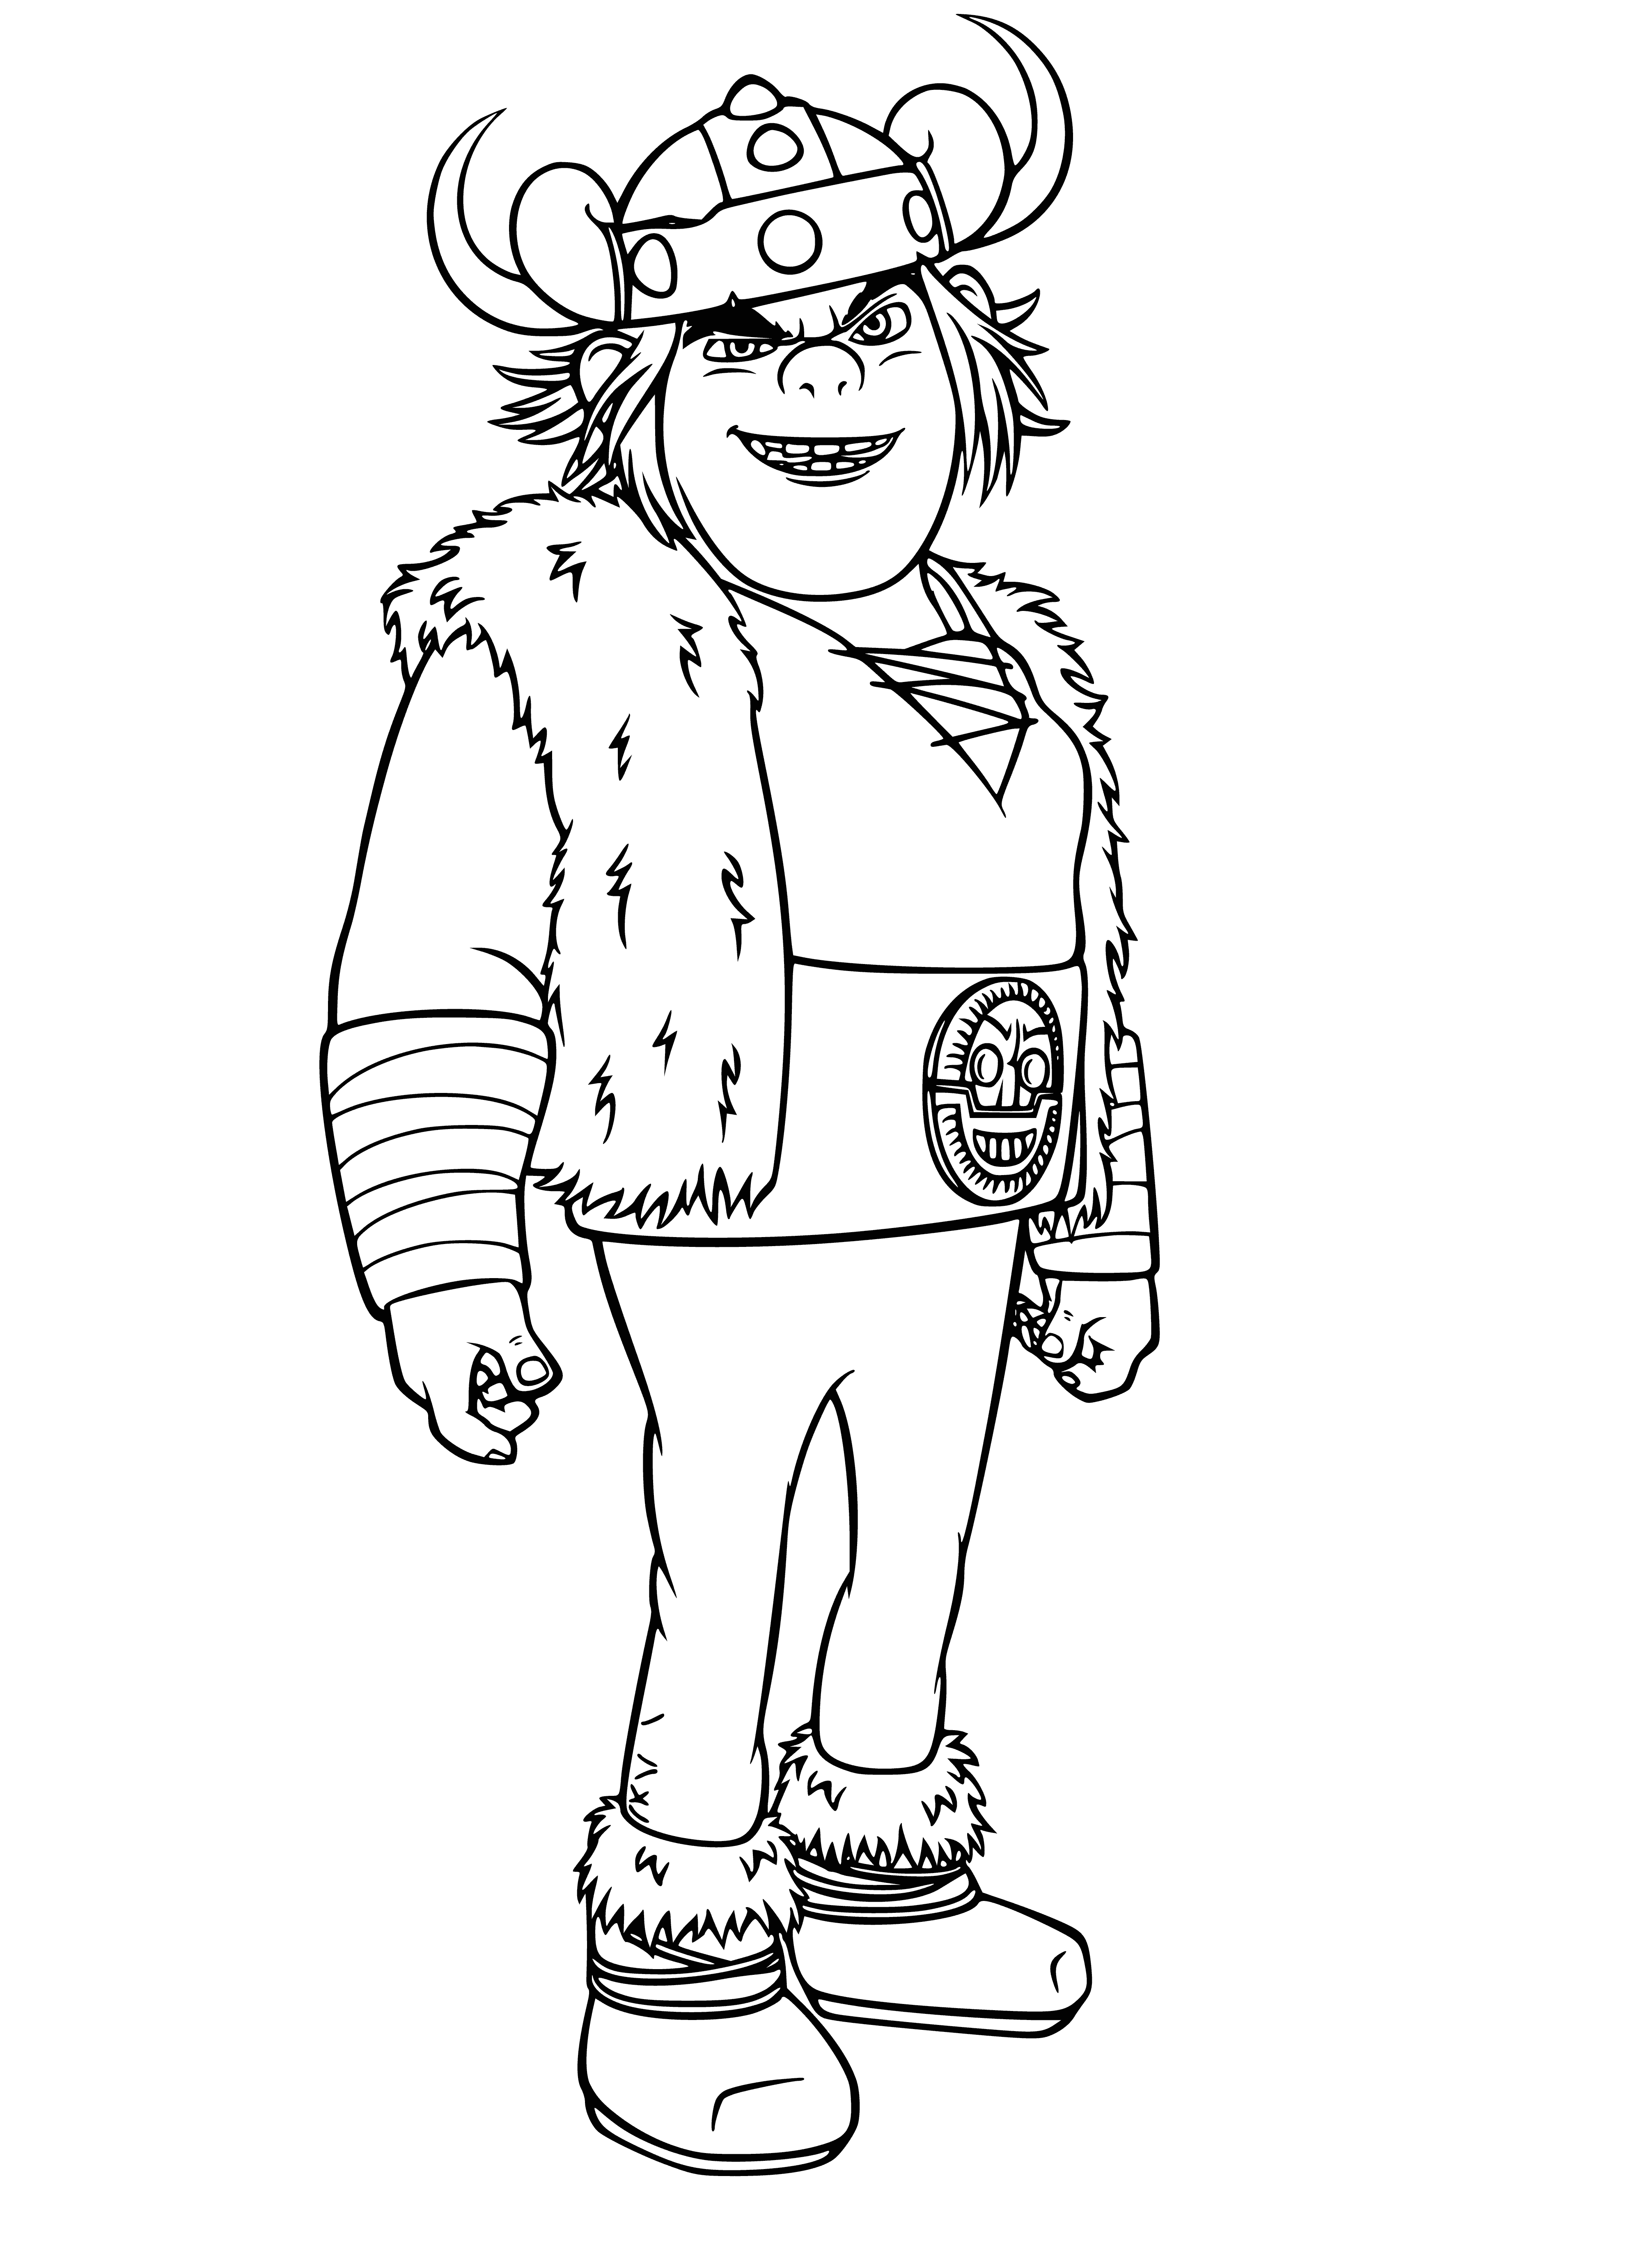 Iorgenson snorted coloring page